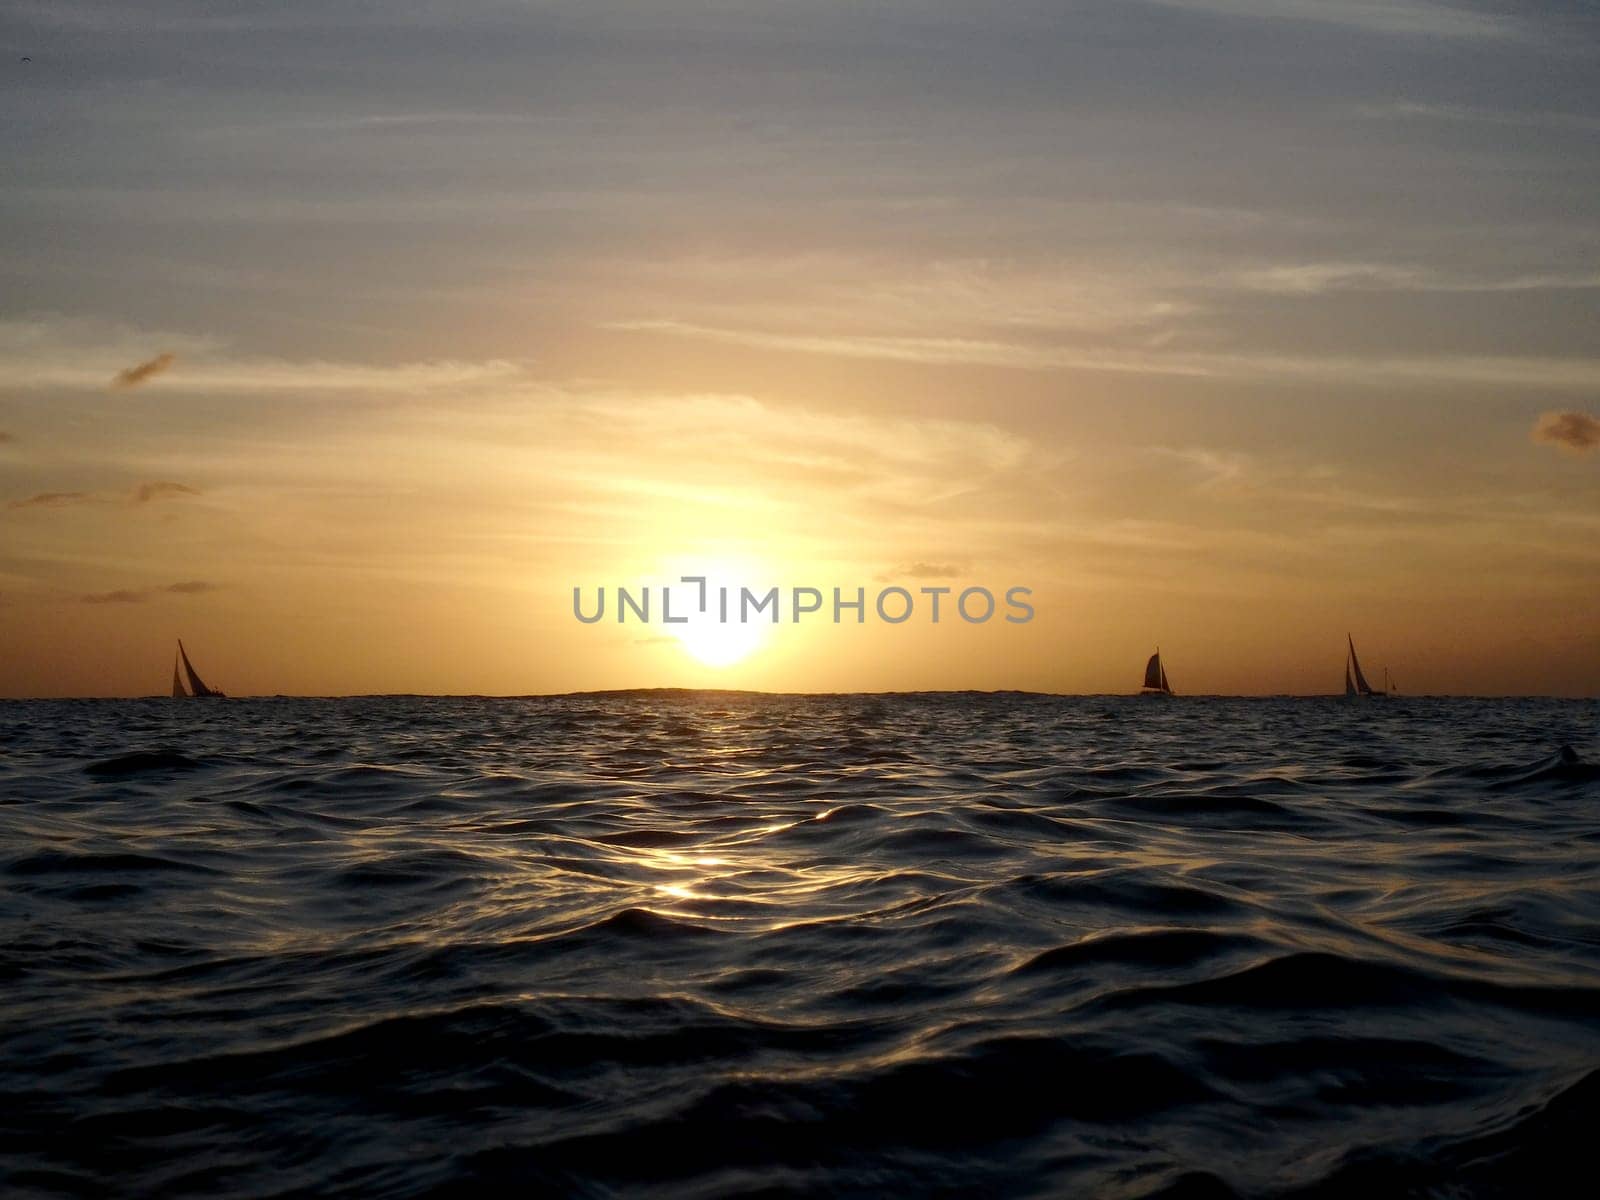 Stunning sunset over the ocean in Waikiki, Hawaii. The sun is setting over the horizon and is partially obscured by clouds. The sky is orange and yellow with a few clouds. The ocean is dark and choppy with a few sailboats in the distance.